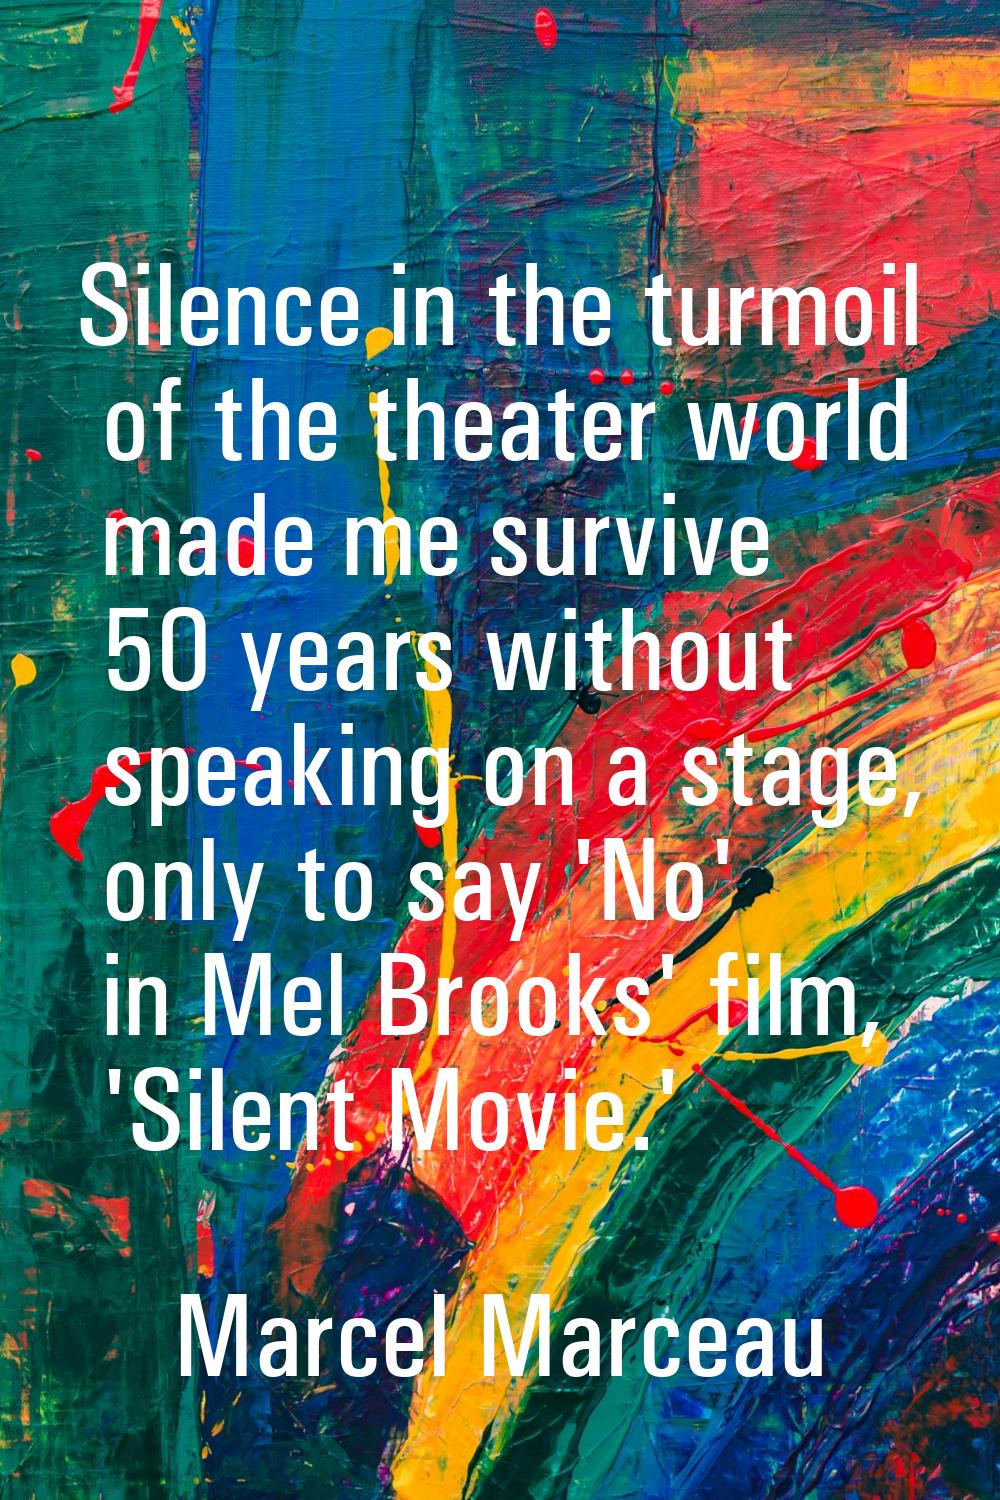 Silence in the turmoil of the theater world made me survive 50 years without speaking on a stage, o